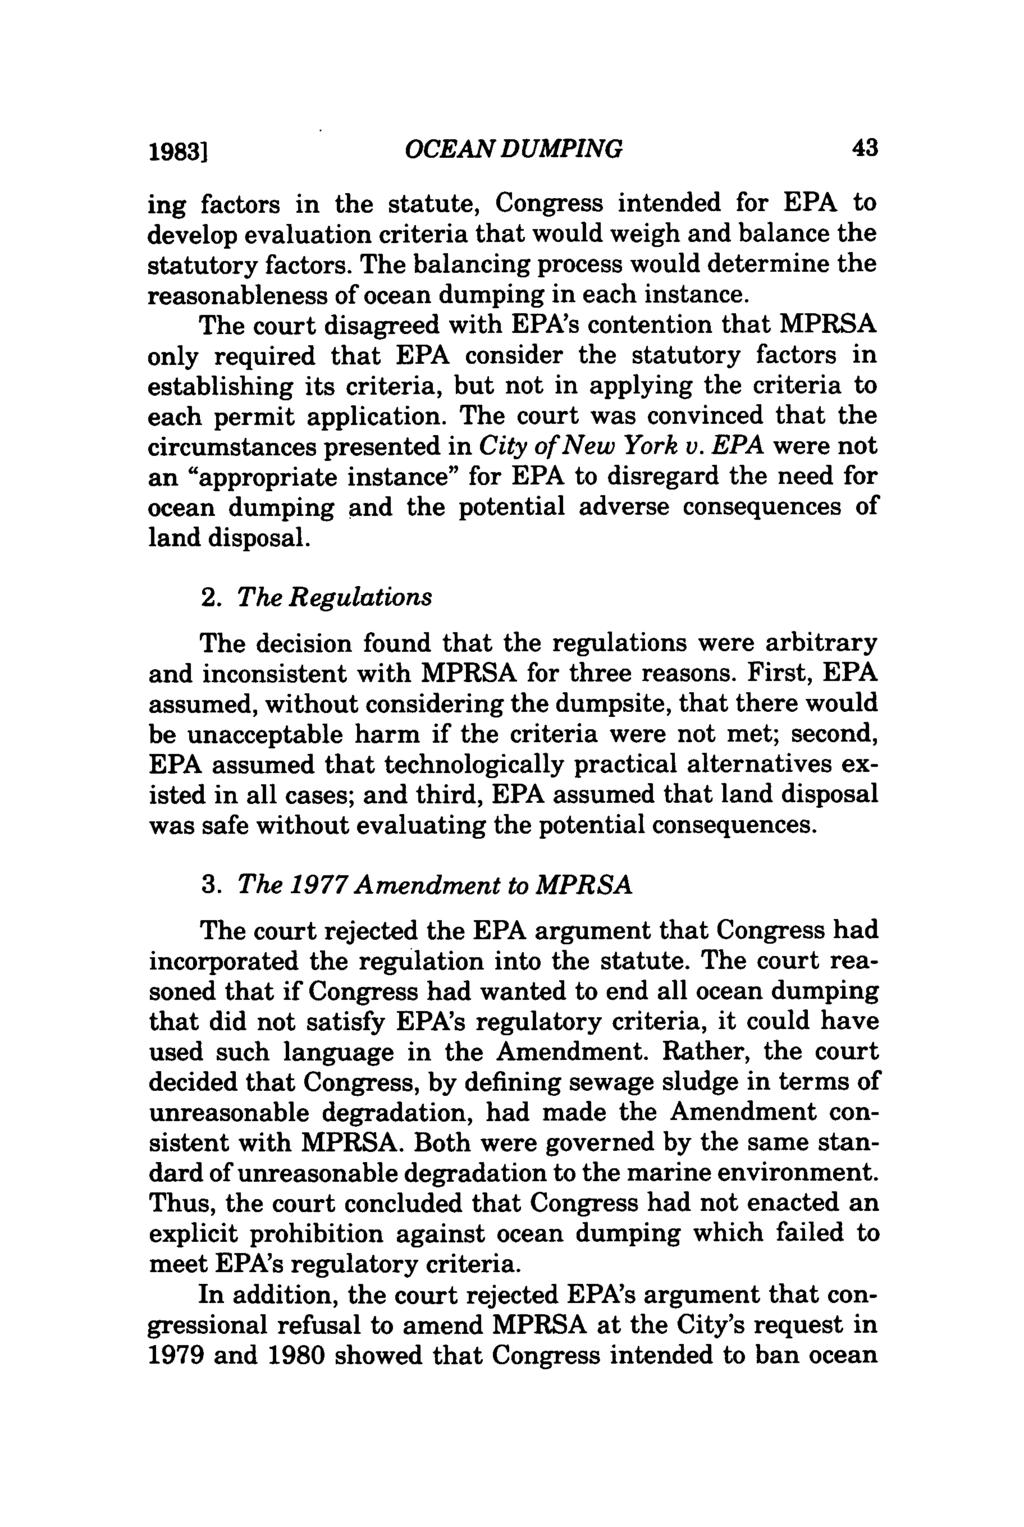 1983] OCEAN DUMPING ing factors in the statute, Congress intended for EPA to develop evaluation criteria that would weigh and balance the statutory factors.